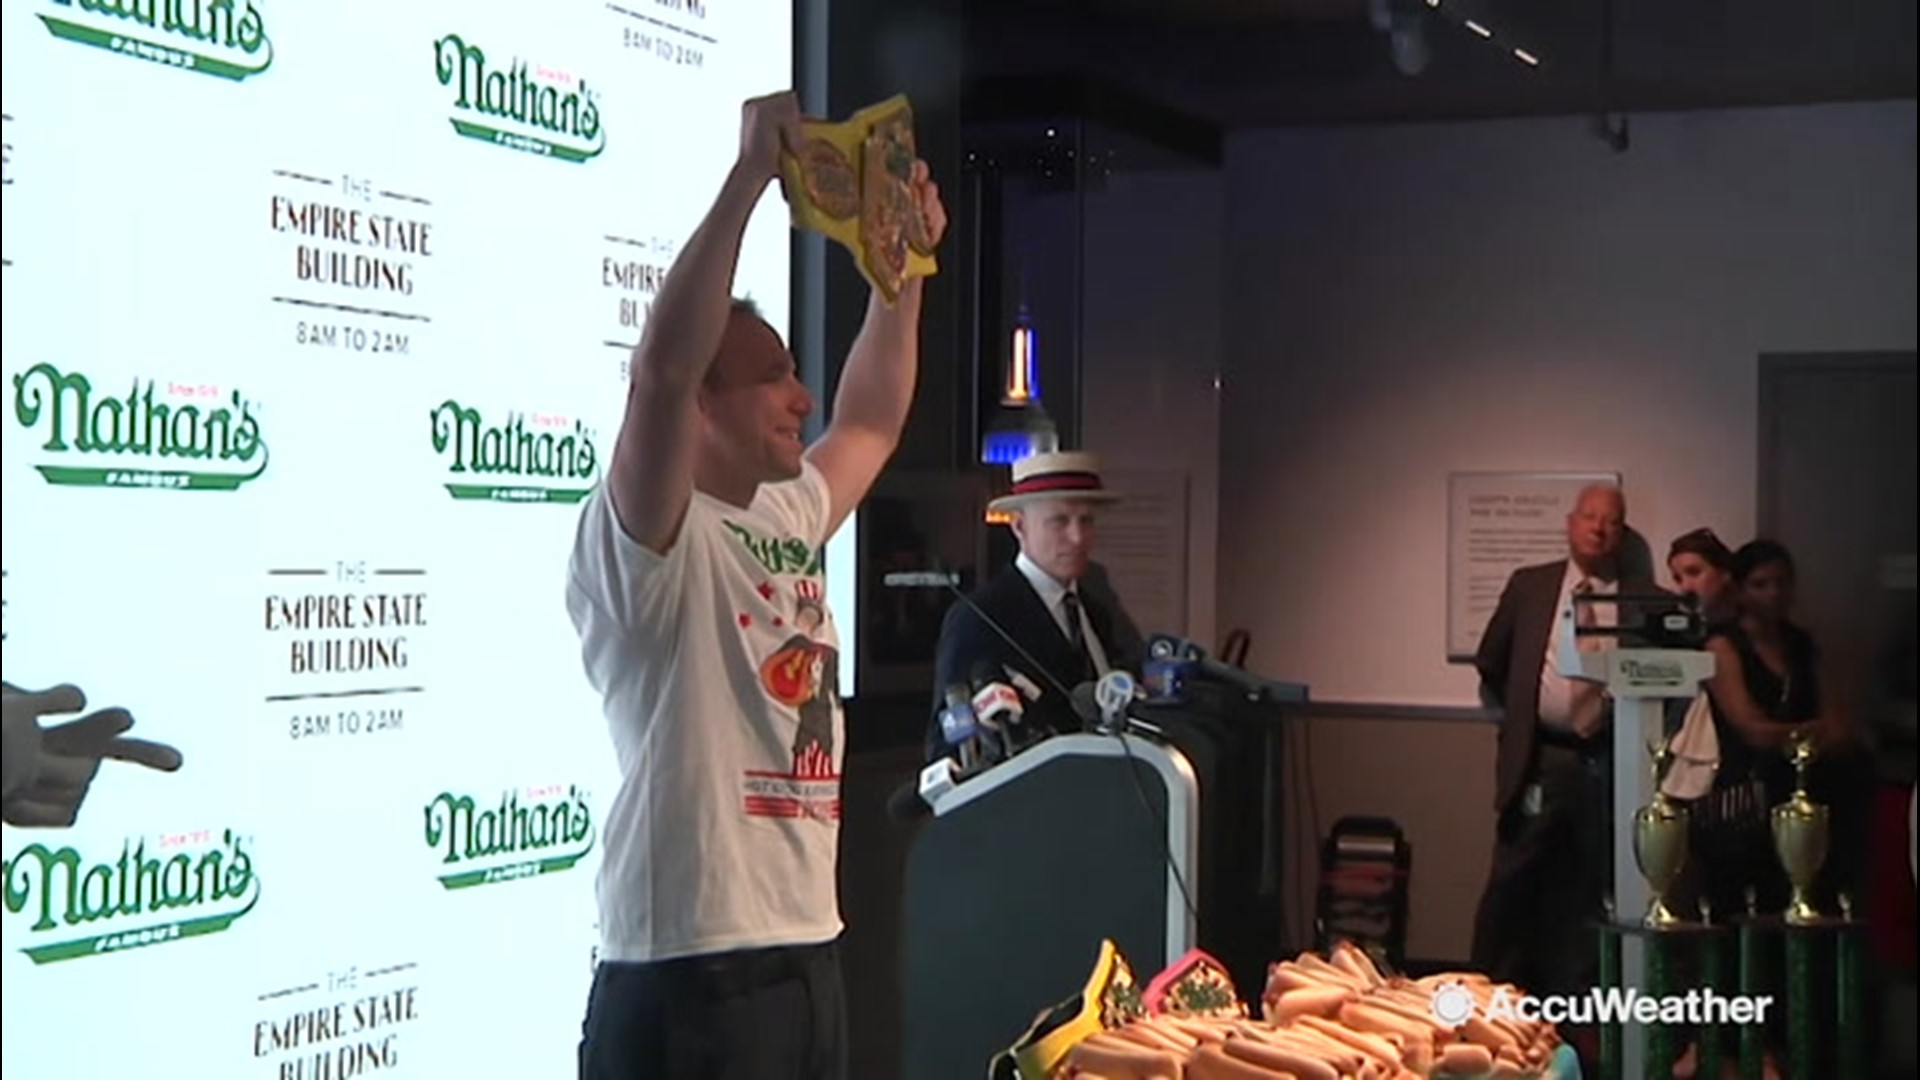 Joey Chestnut, hot dog eating champion, weighs in on how the heat might effect his performance at tomorrow's hot dog eating competition in Coney Island, NY, July 4th.